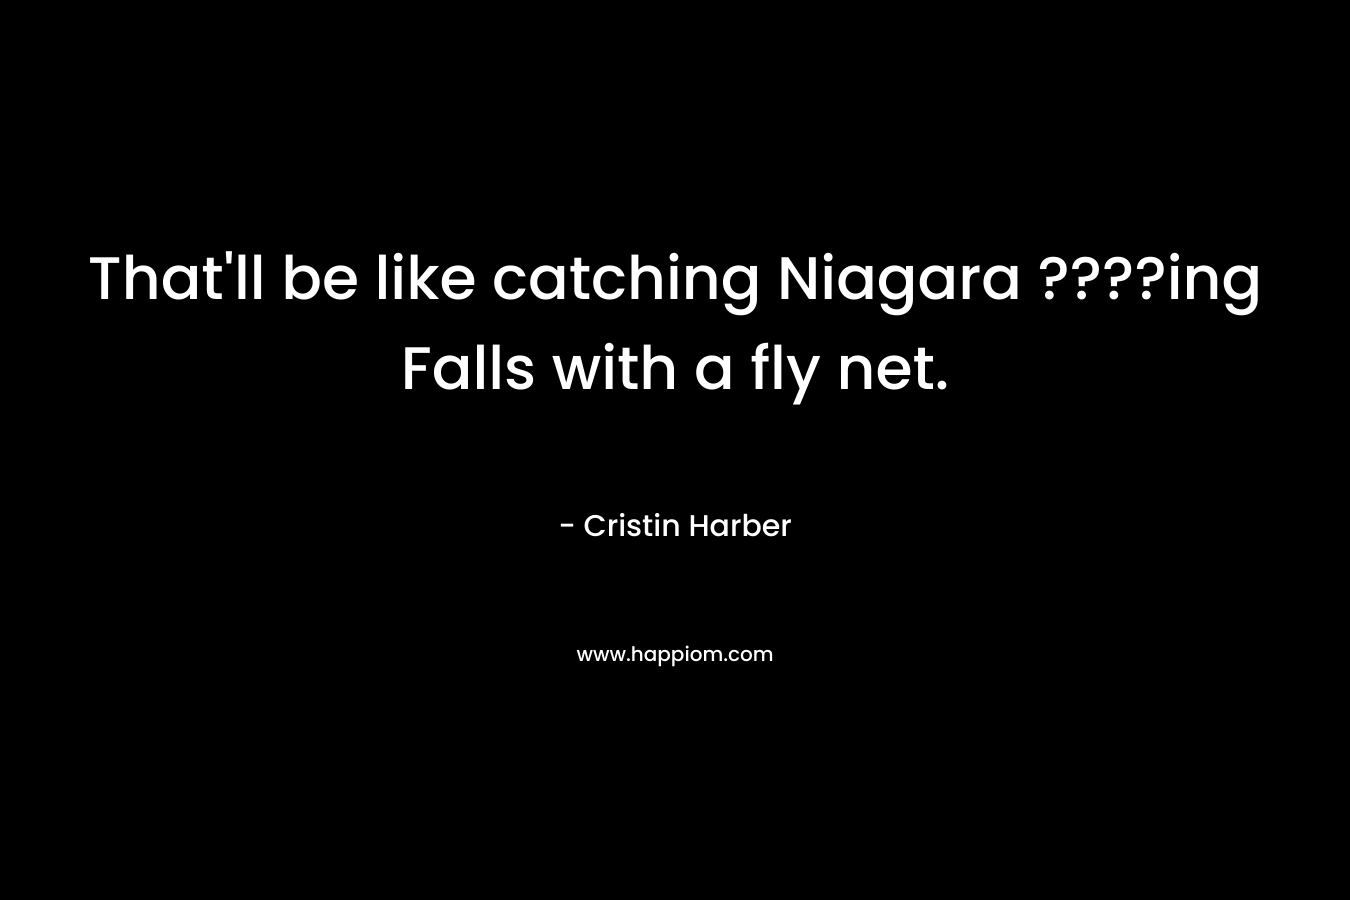 That’ll be like catching Niagara ????ing Falls with a fly net. – Cristin Harber